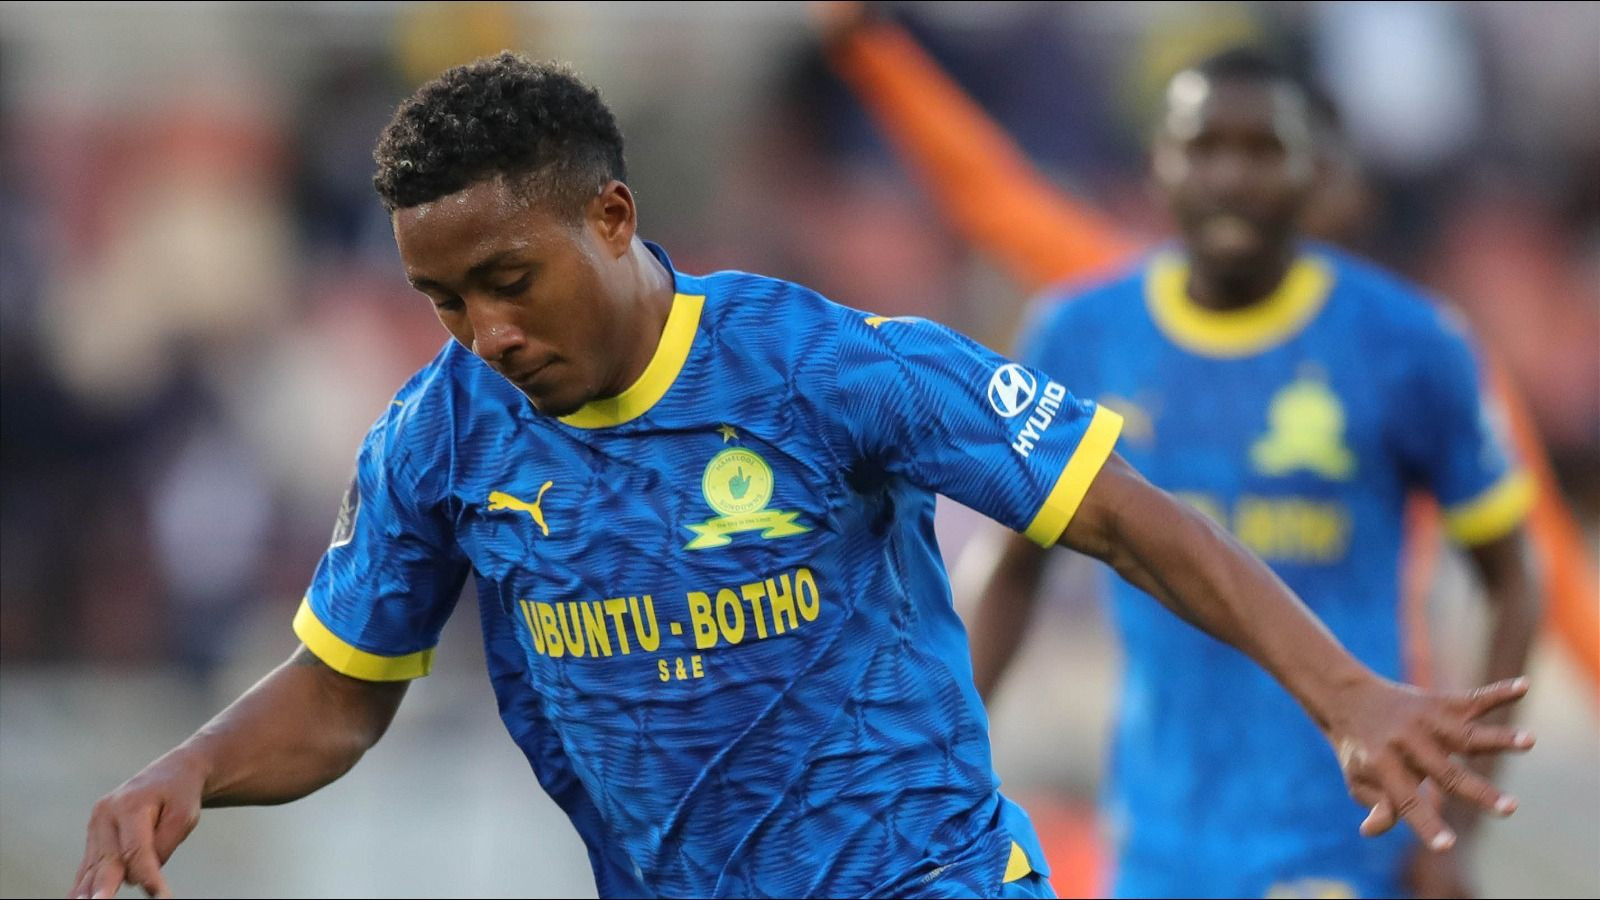 mamelodi sundowns clinch dstv premiership title with victory over kaizer chiefs